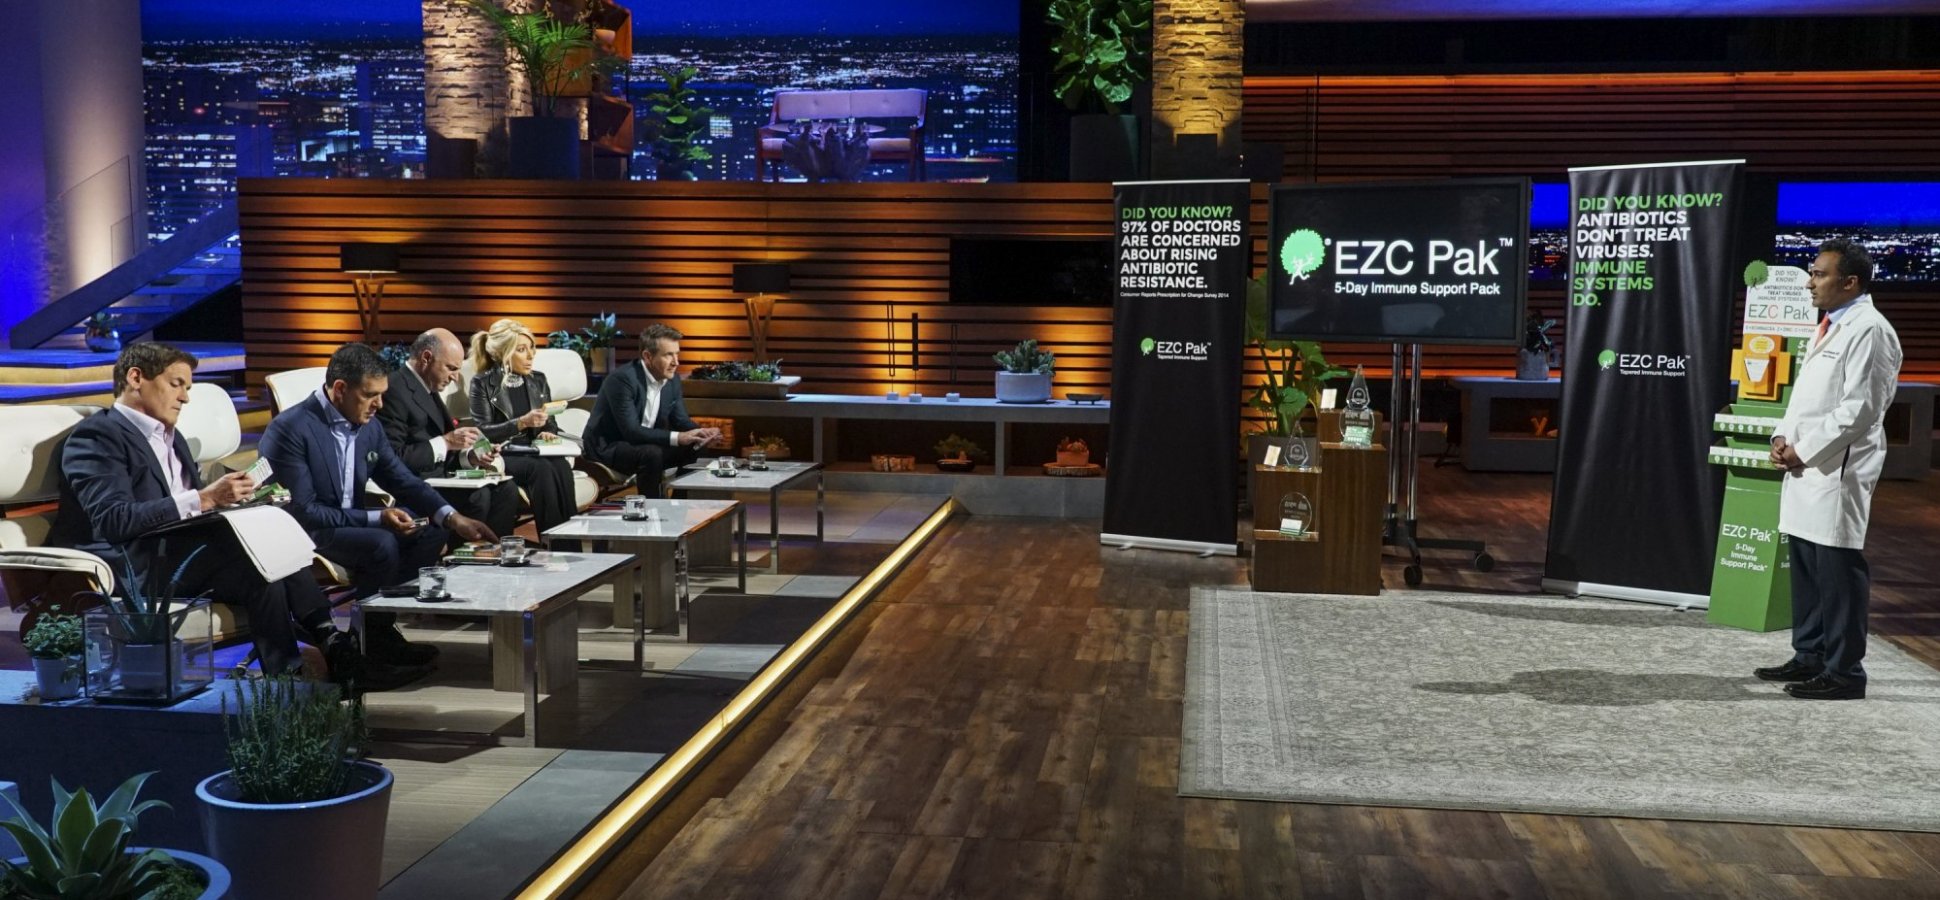 The Businesses and Products from Season 15, Episode 8 of Shark Tank